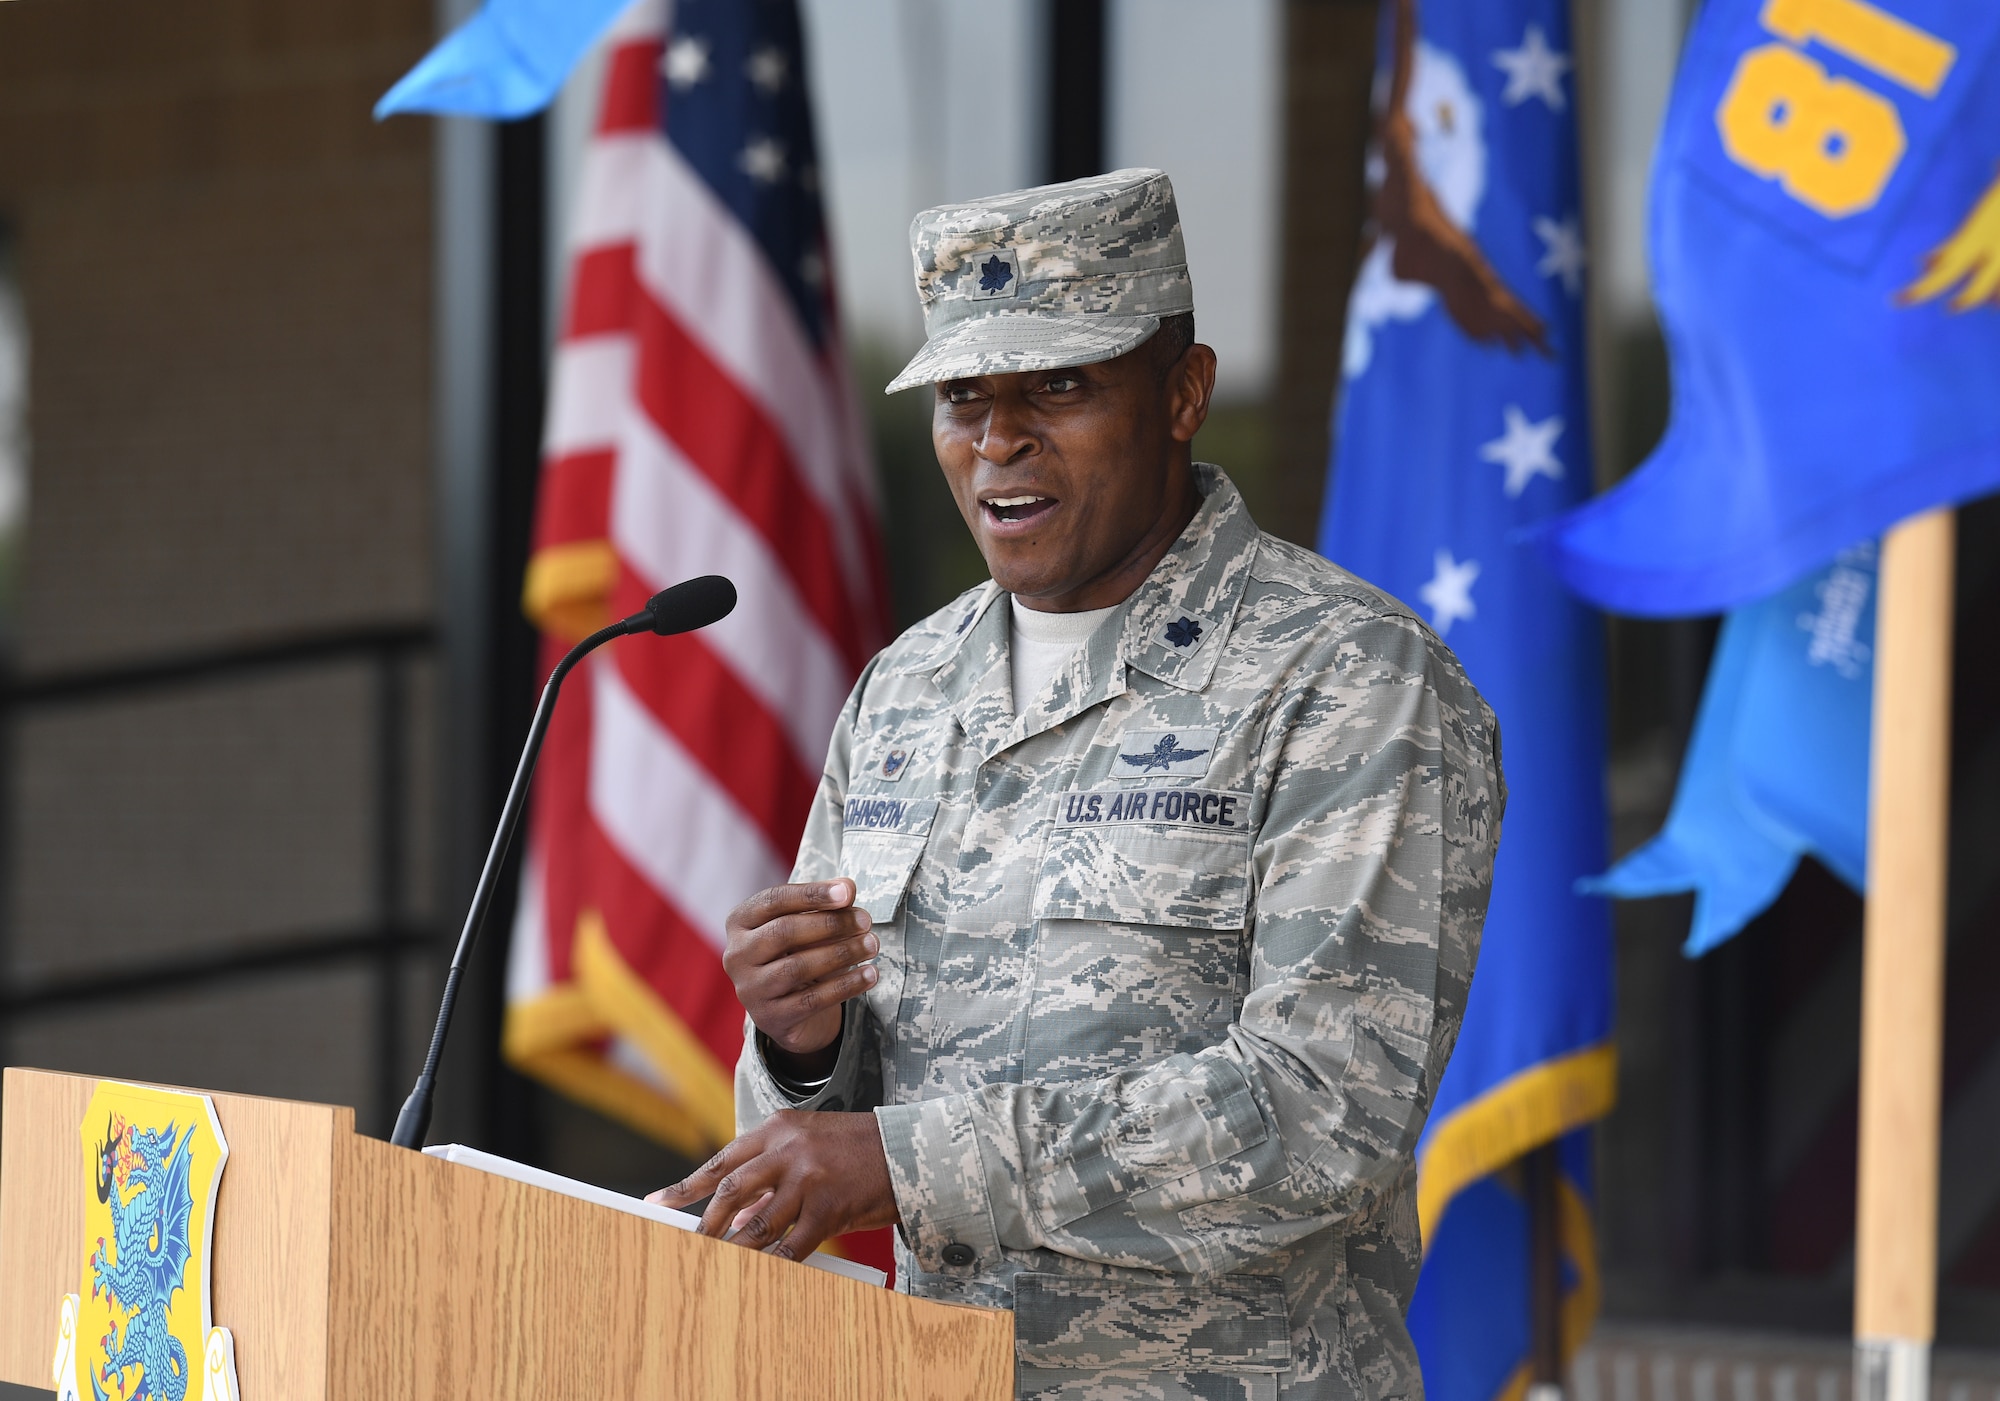 U.S. Air Force Lt. Col. Andre Johnson, 338th Training Squadron commander, delivers remarks during a Military Training Leader course graduation ceremony at the Levitow Training Support Facility on Keesler Air Force Base, Mississippi, May 30, 2019. The MTL course is responsible for training approximately 120 MTLs per year. Those MTLs are then responsible for training approximately 30,000 Airmen in 49 different locations that fall under Air Education and Training Command. (U.S. Air Force photo by Kemberly Groue)